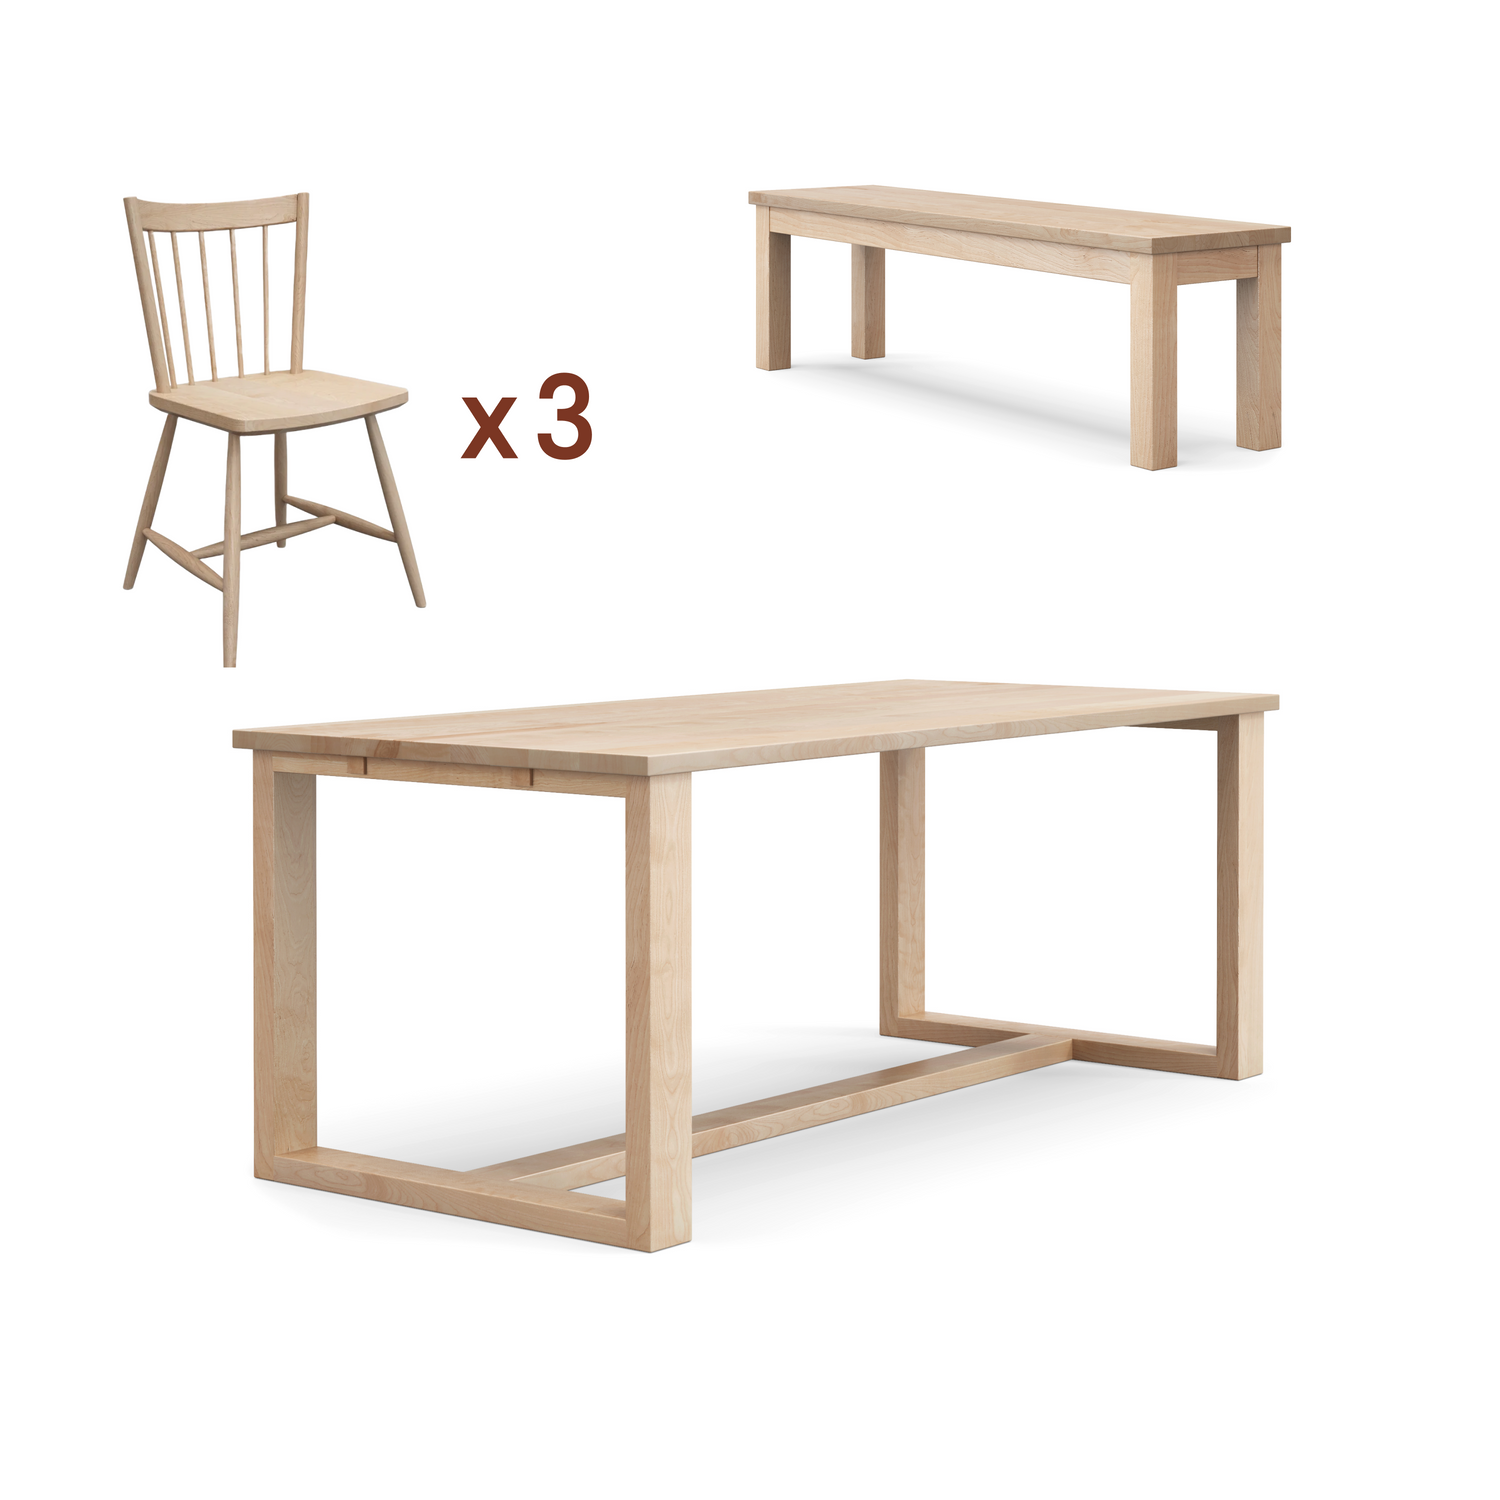 Arwin table + bench + chairs bundle